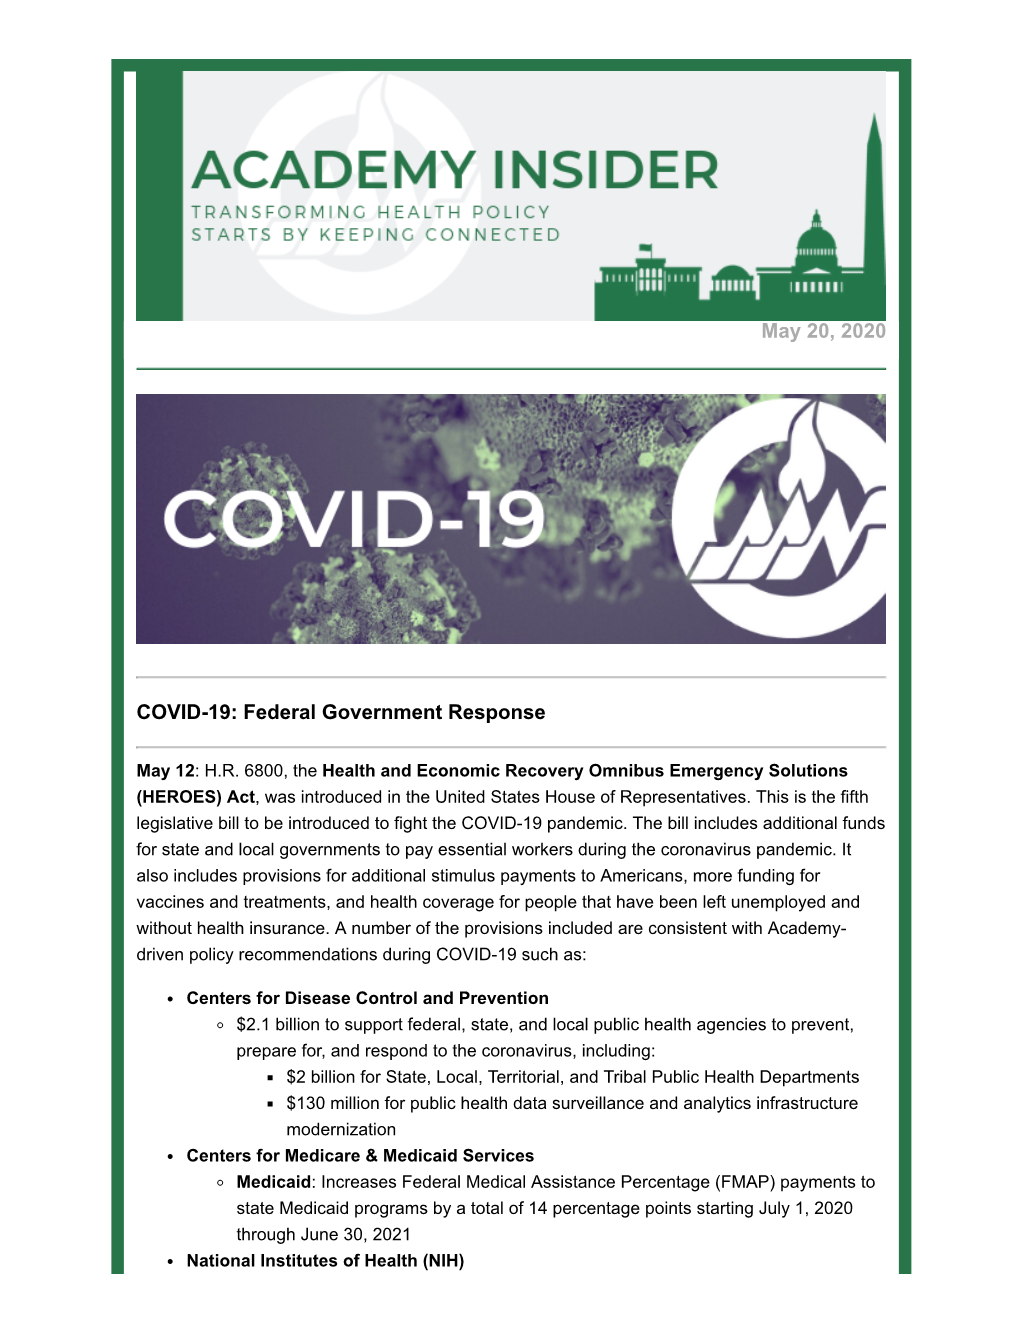 May 20, 2020 COVID-19: Federal Government Response